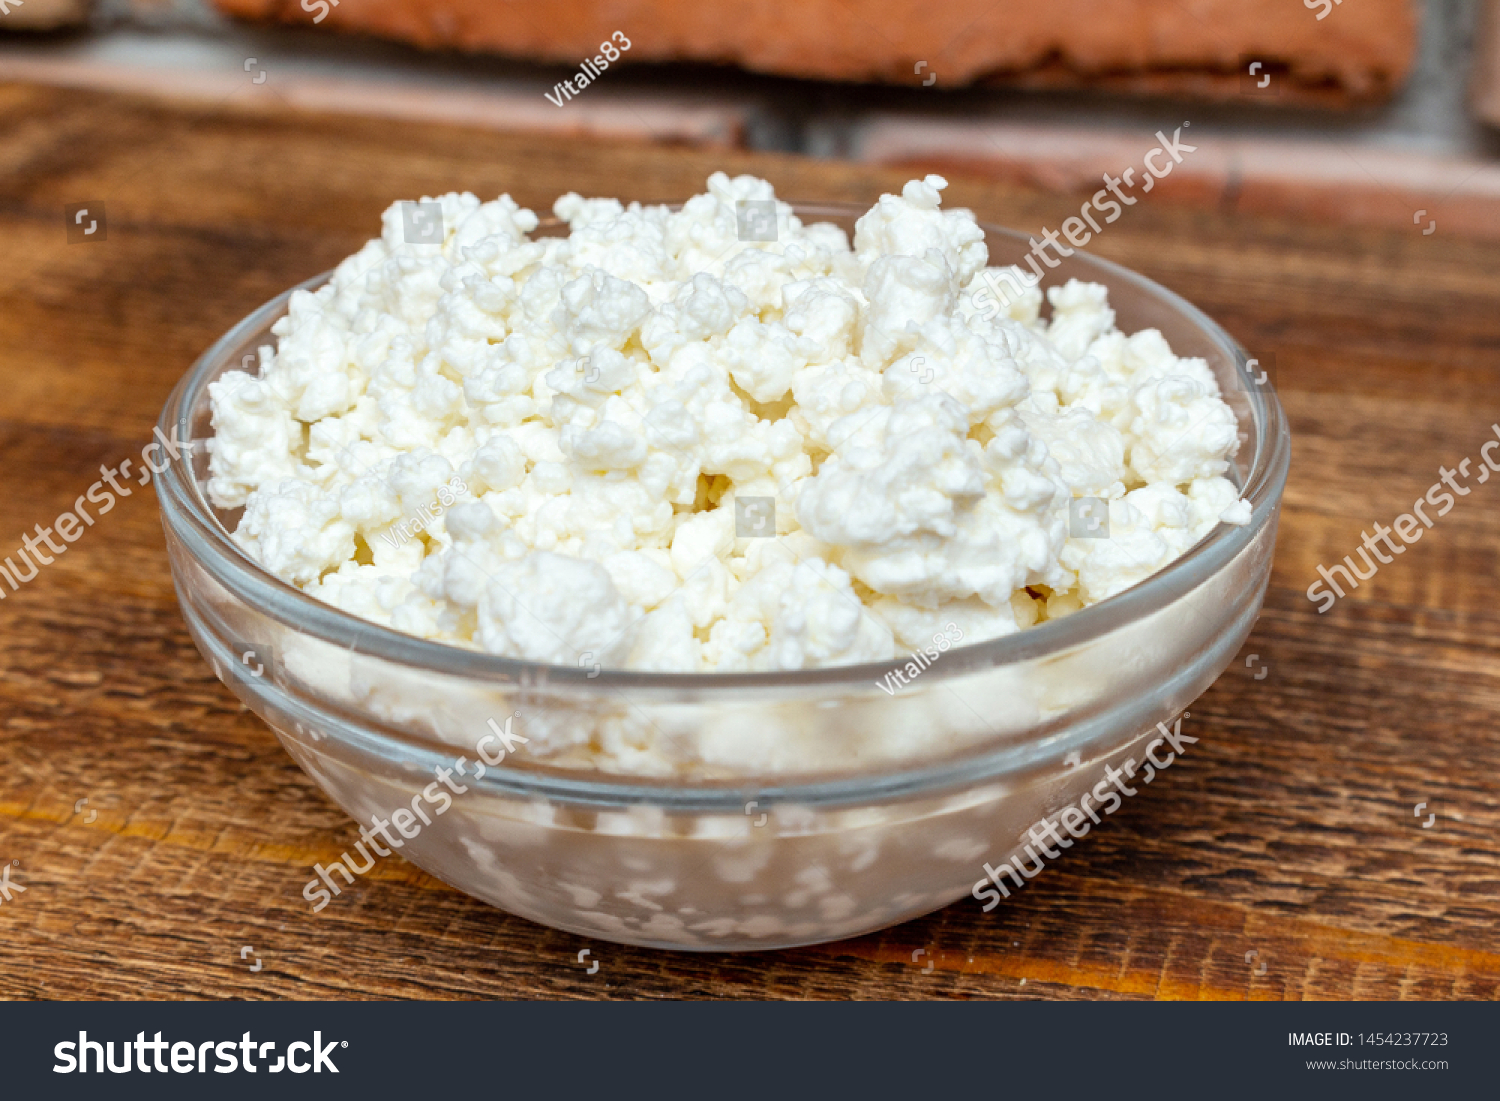 Farm Cottage Cheese Close On Wooden Stock Photo Edit Now 1454237723